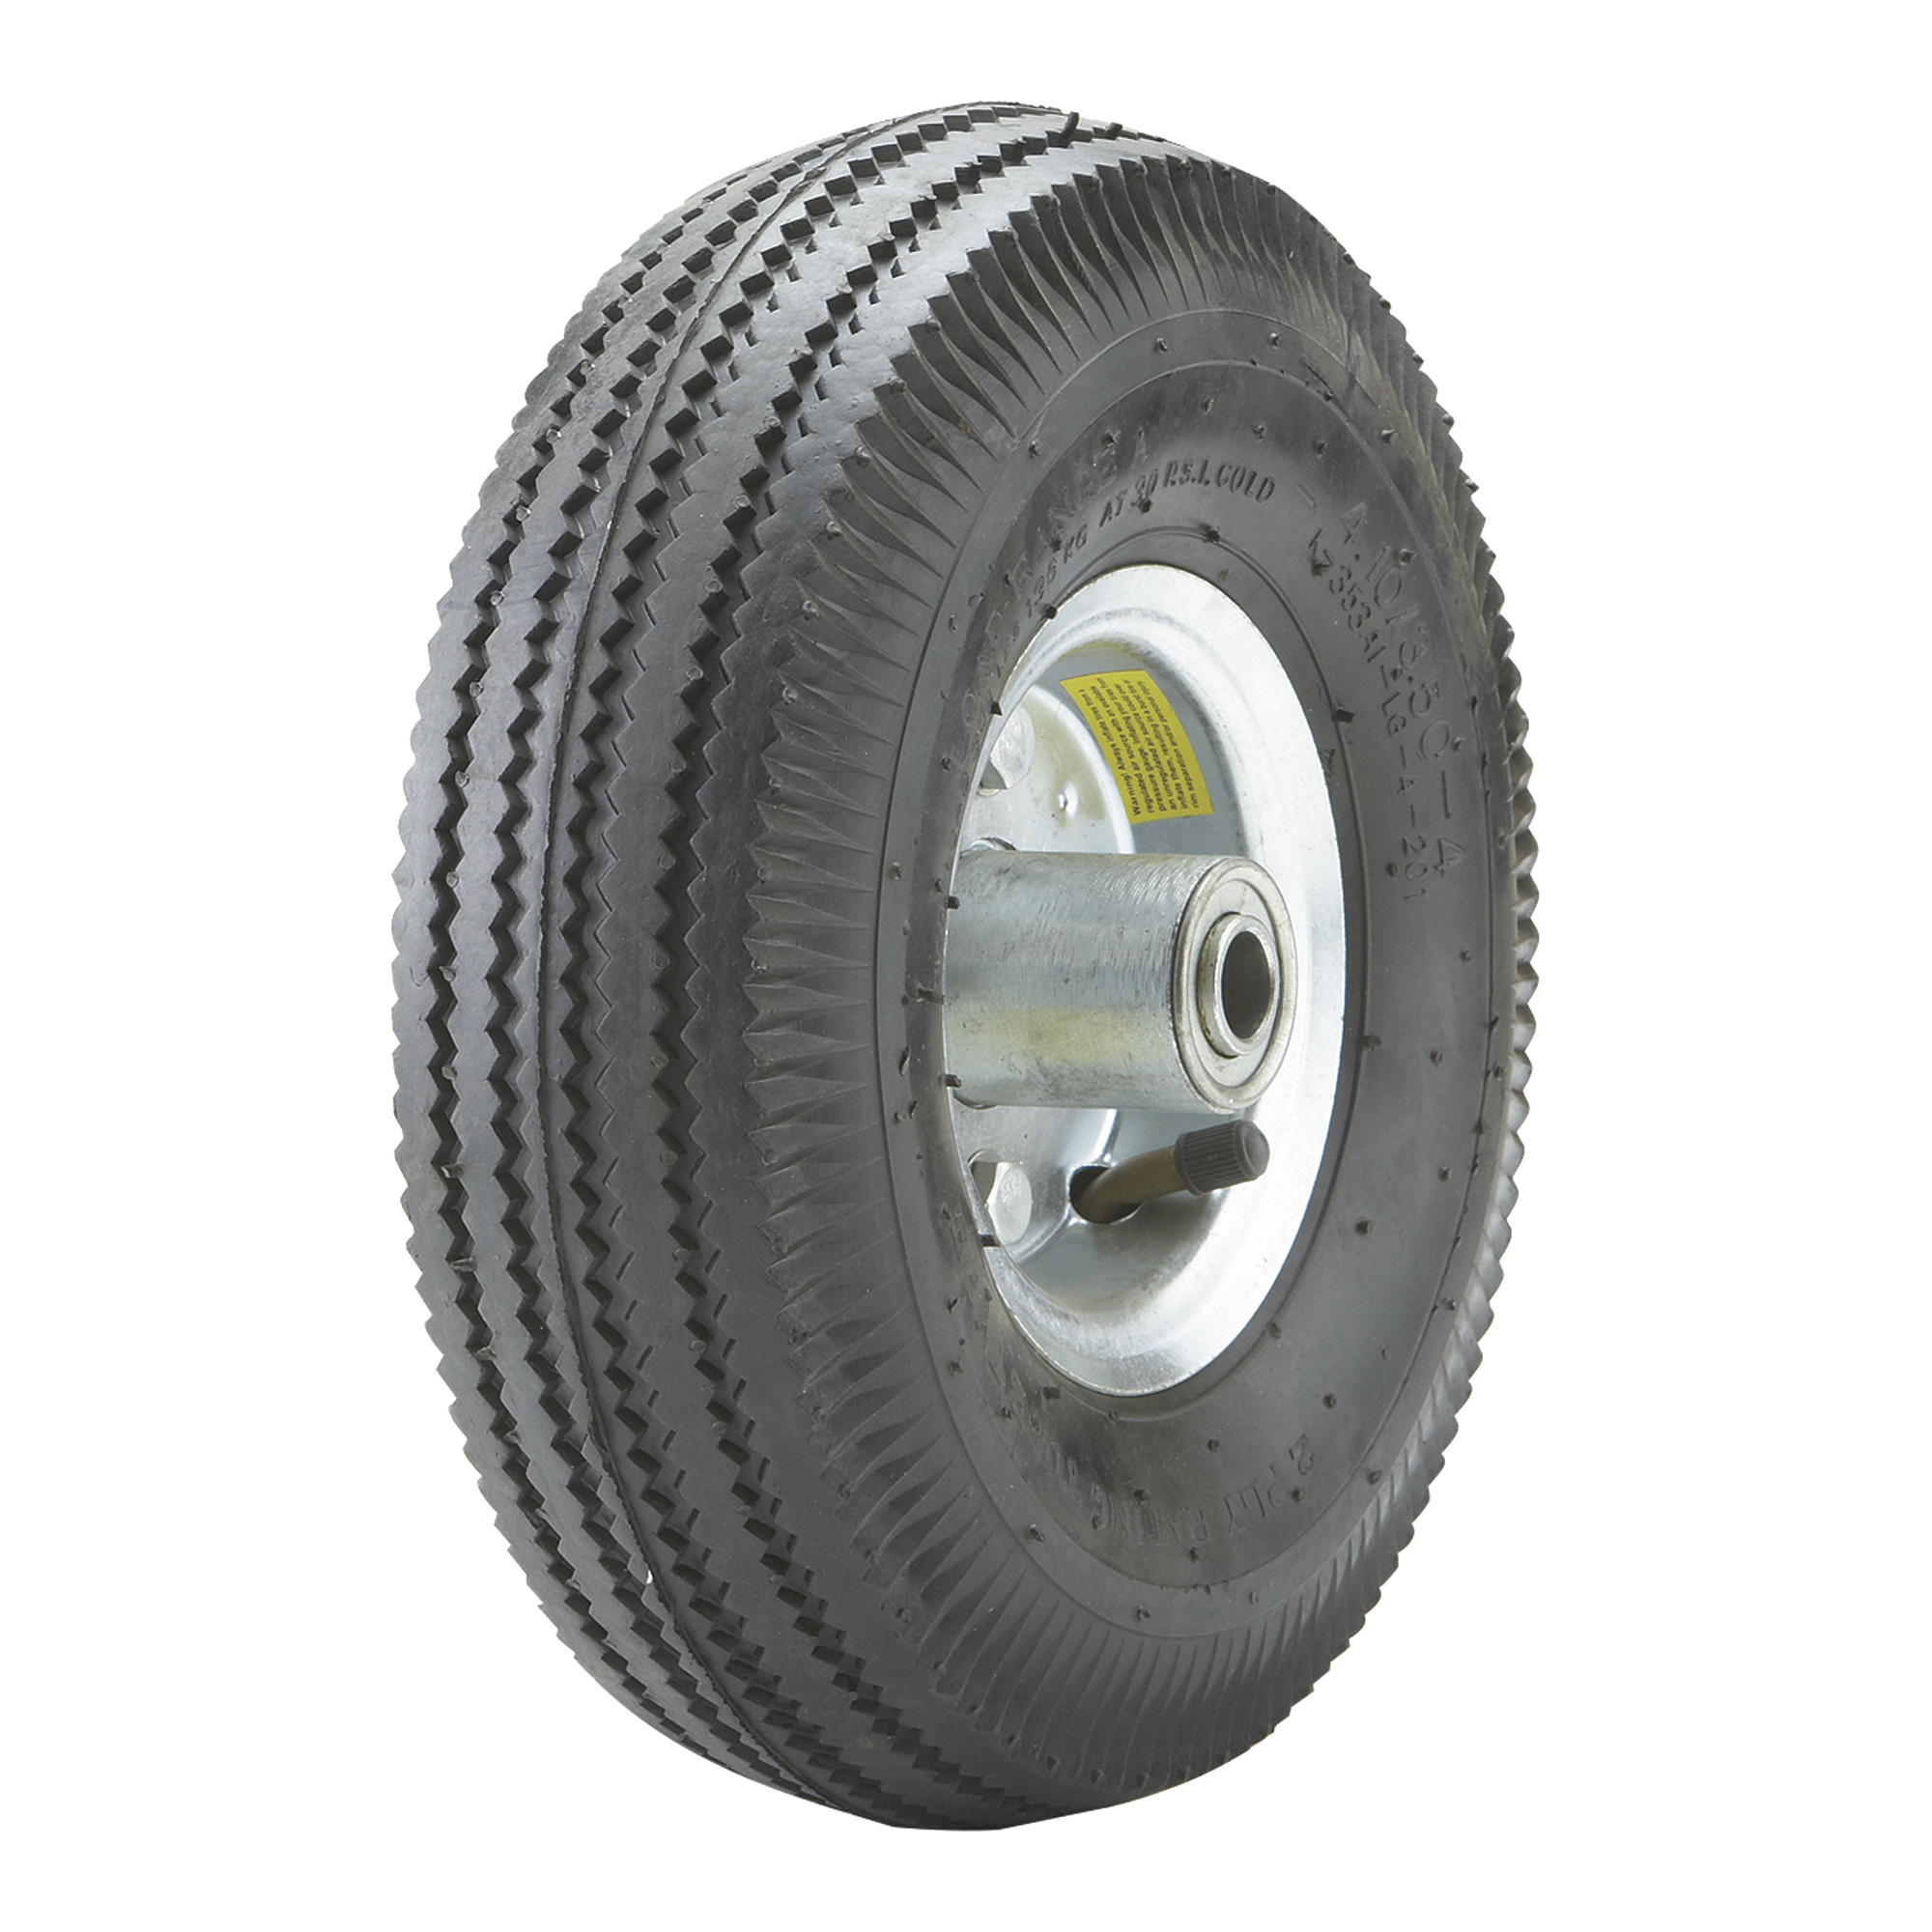 Pneumatic Tire and Wheel — 10in. x 4.10/3.50-4